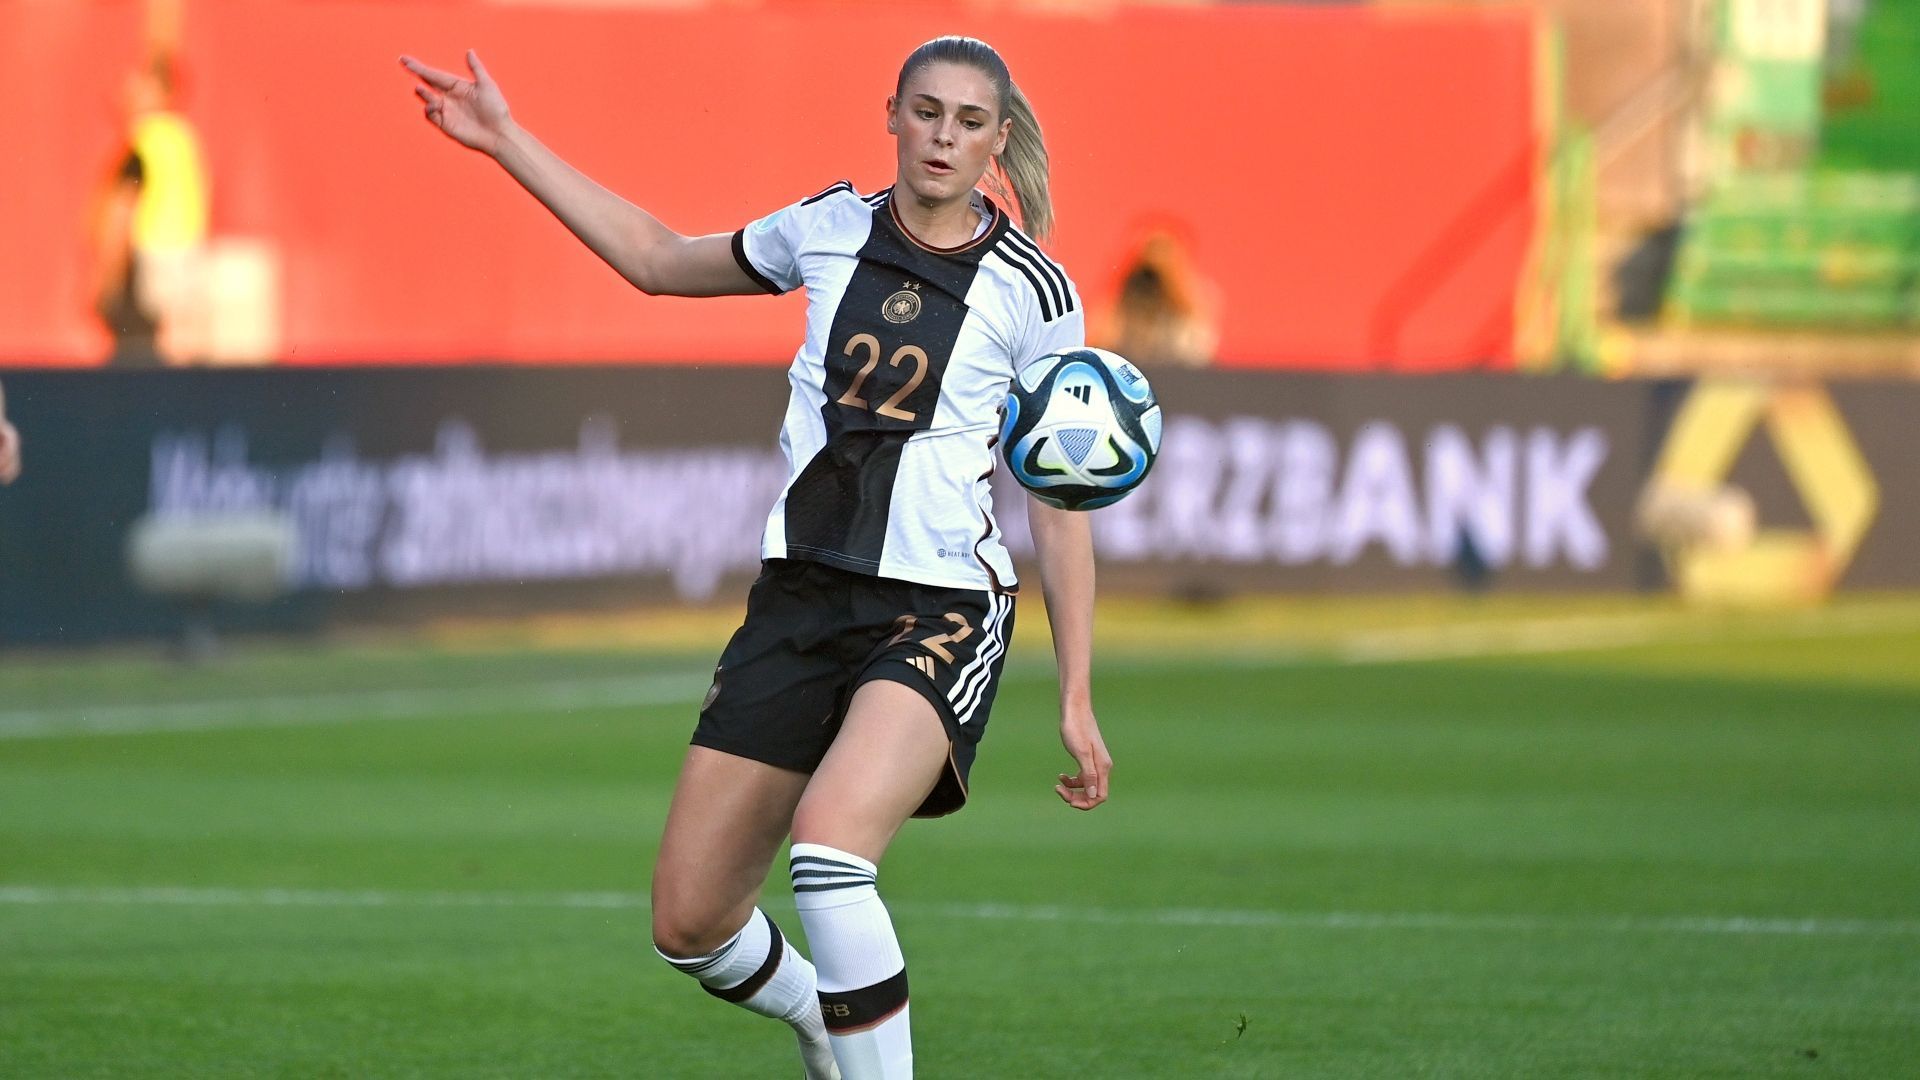 
                <strong>Jule Brand</strong><br>
                &#x2022; <strong>Position: </strong>Mittelfeld/Angriff<br>&#x2022; <strong>Verein: </strong>VfL Wolfsburg<br>&#x2022; <strong>Trikotnummer: </strong><br>&#x2022; <strong>Alter: </strong><br>&#x2022; <strong>Länderspiele: </strong><br>&#x2022; <strong>Länderspiel-Tore: </strong><br>
              